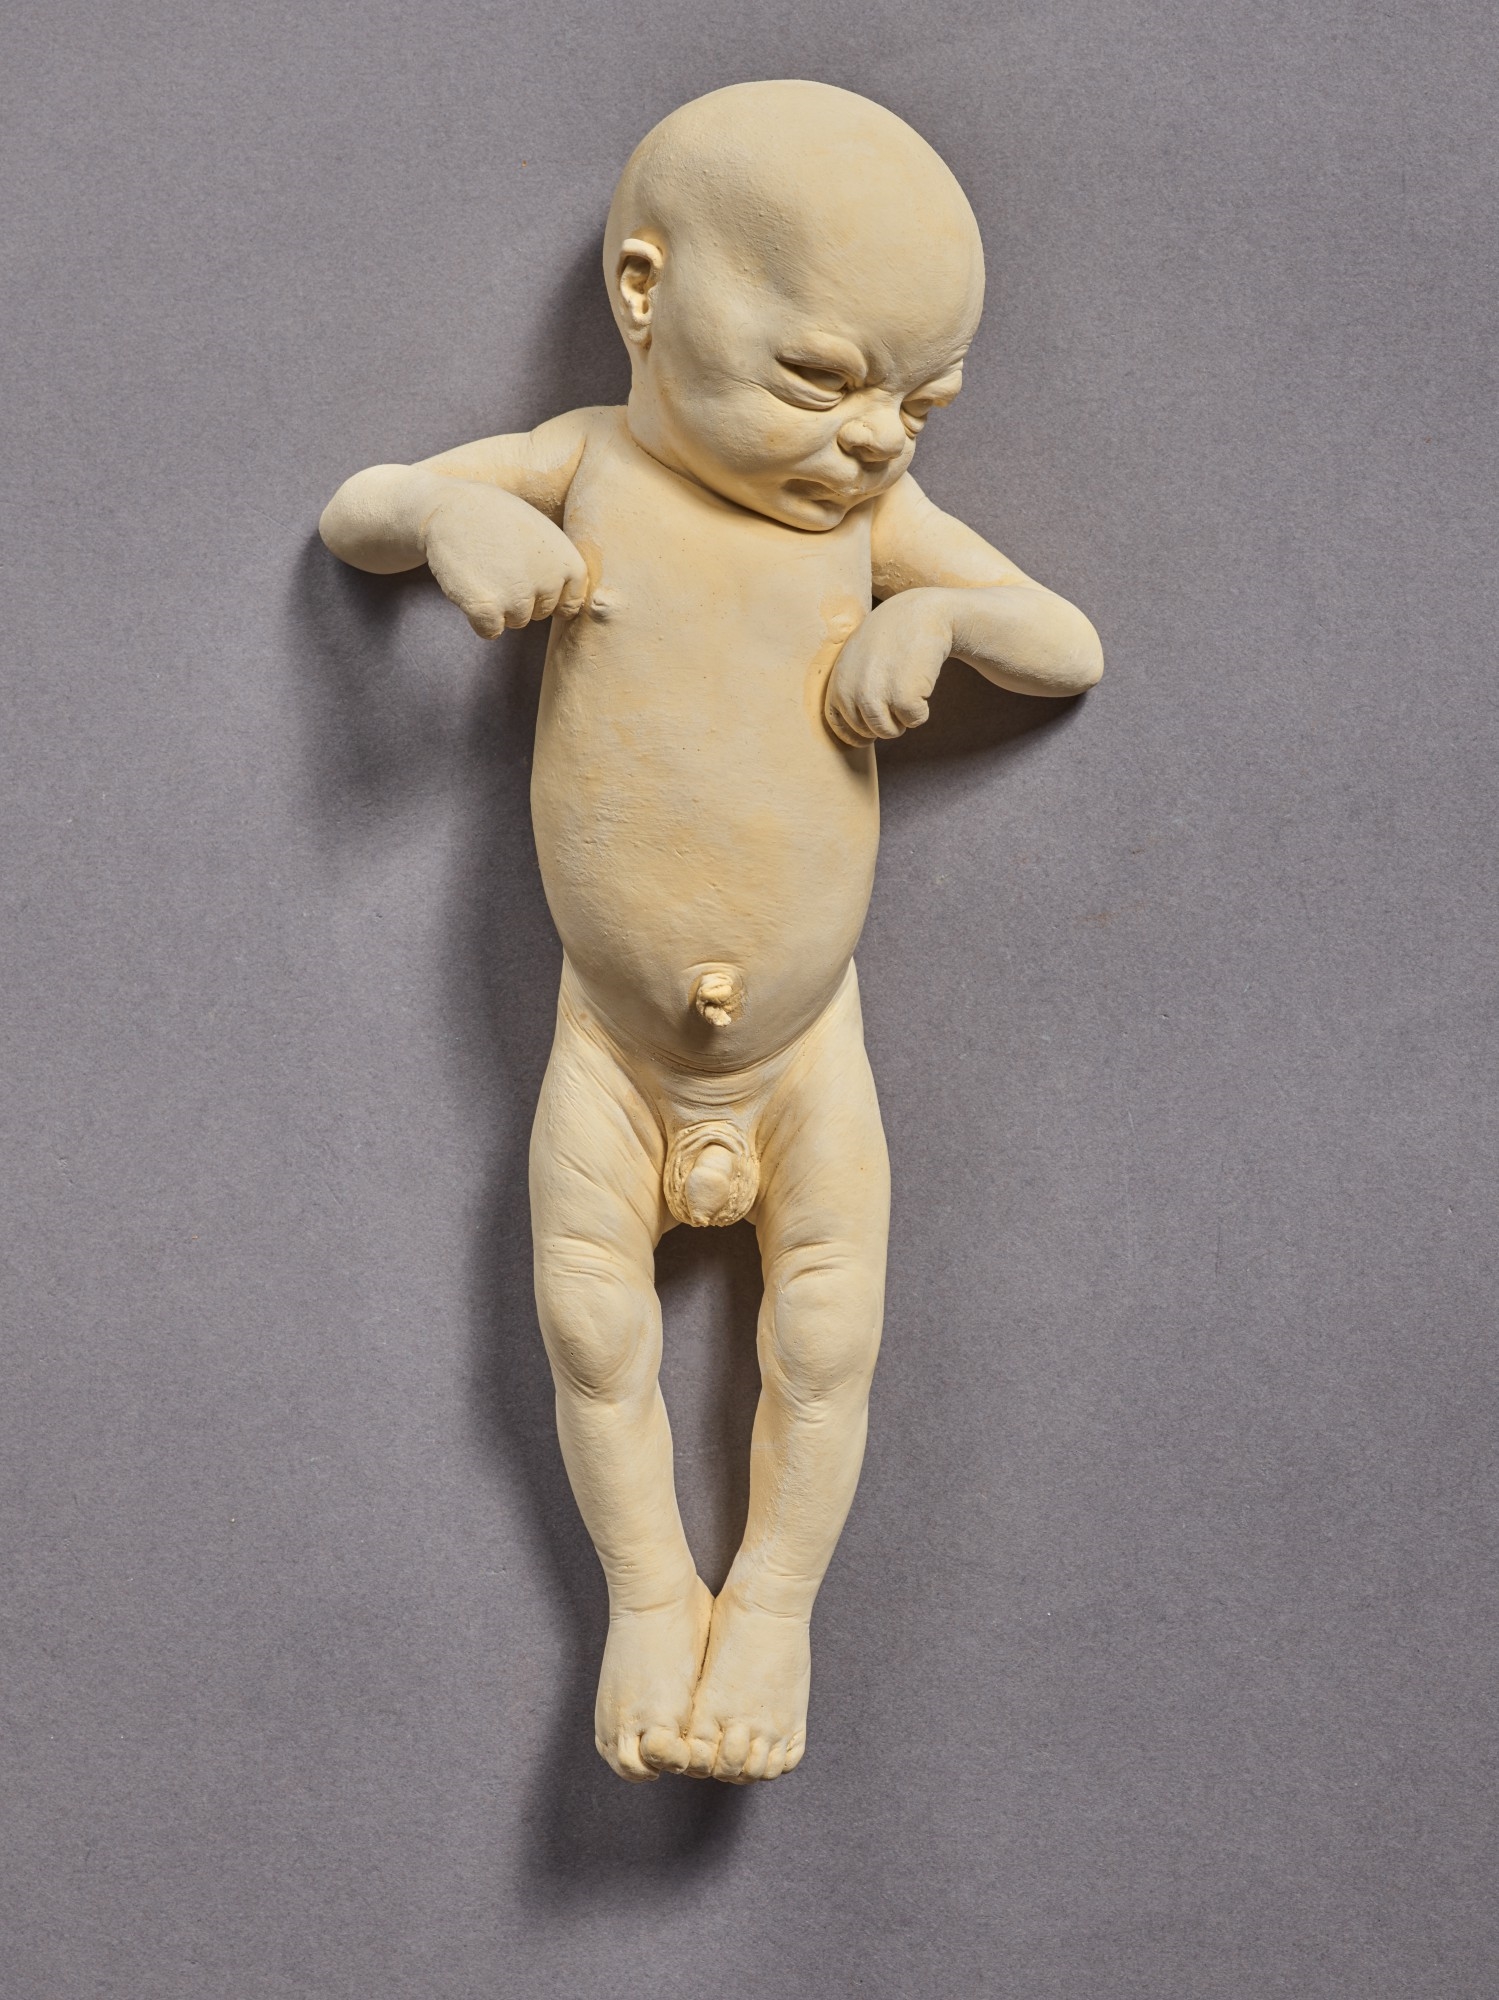 Artwork by Ron Mueck, Untitled (Baby), Made of plaster